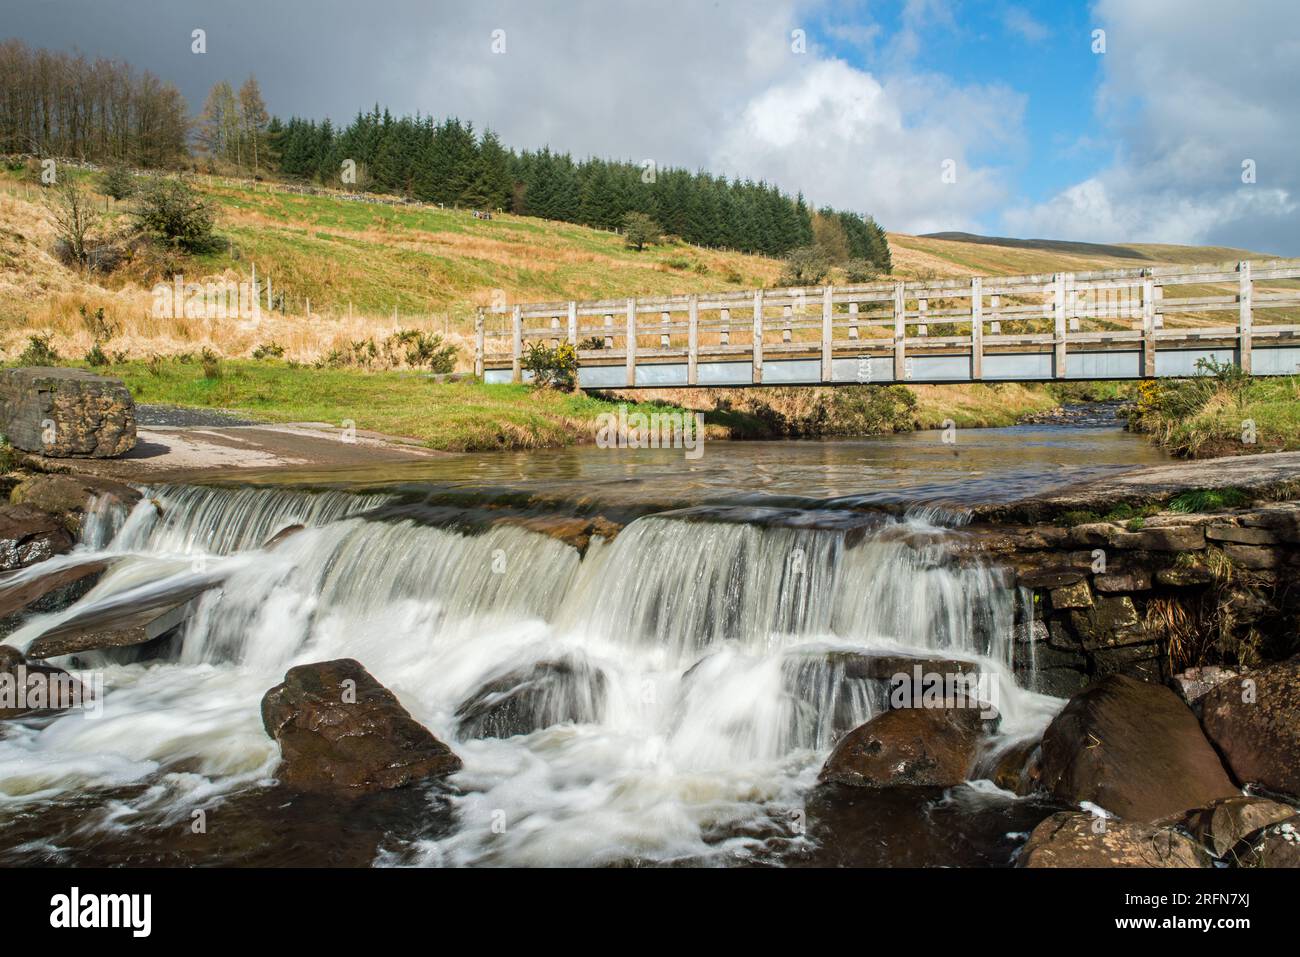 The Afon Llia River running through Fforest Fawr in the Brecon Beacons National Park in south Wales in April  - the road bridge is for timber lorries Stock Photo